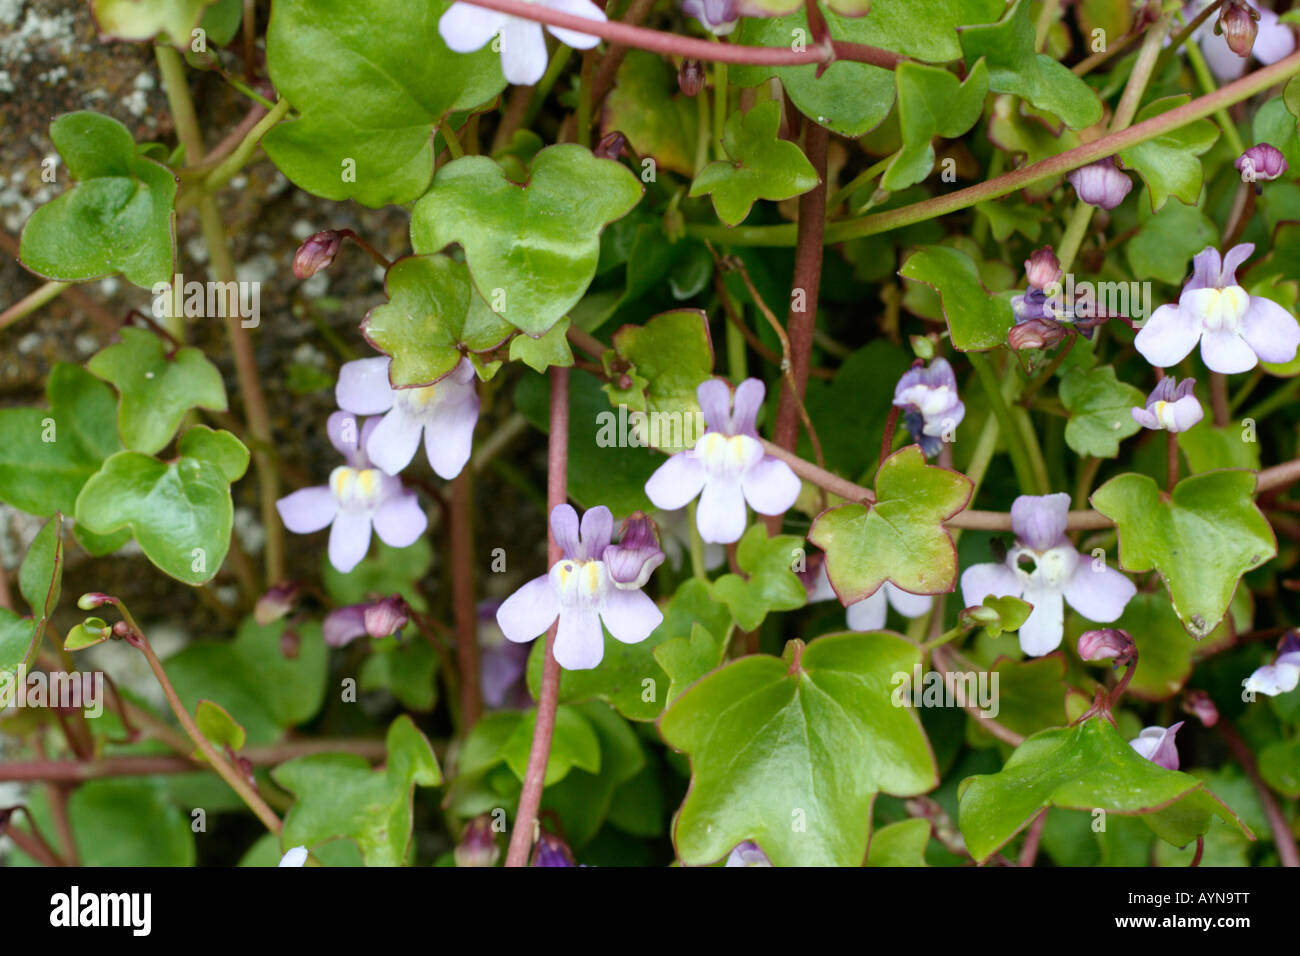 CYMBALARIA MURALIS IVY LEAVED TOADFLAX MID APRIL Stock Photo